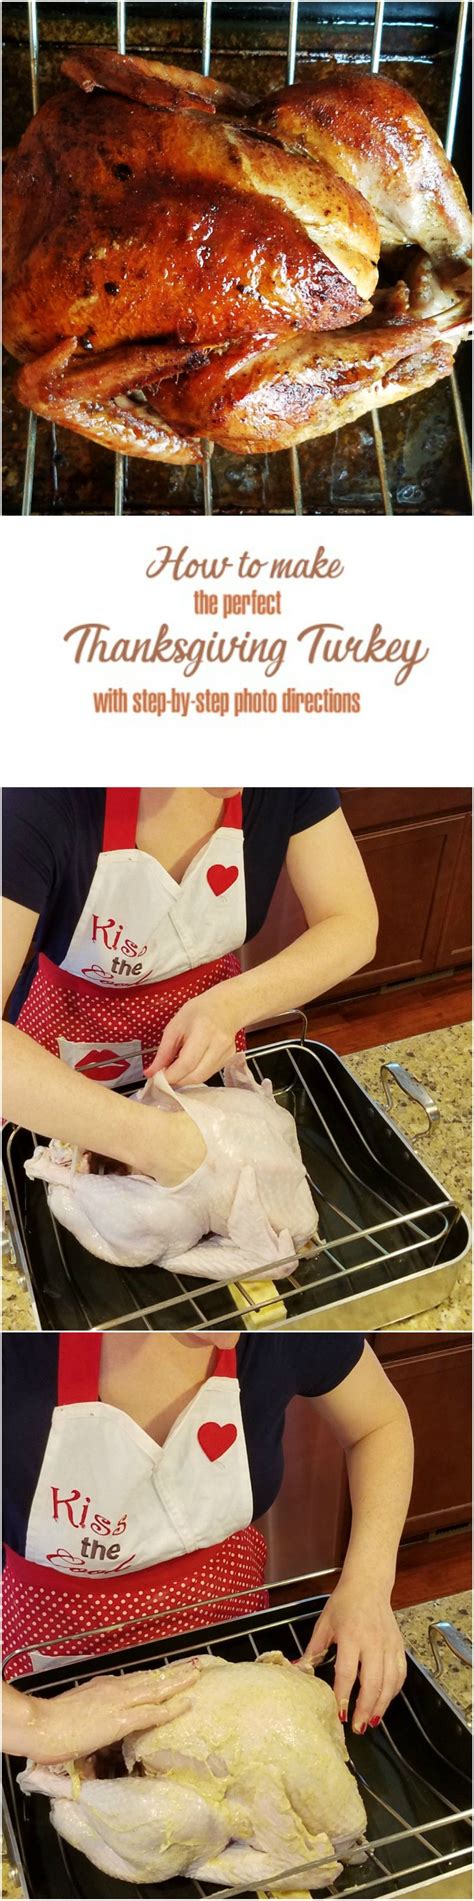 How To Cook A Perfect Thanksgiving Turkey With Photo Directions Turkey Recipes Thanksgiving